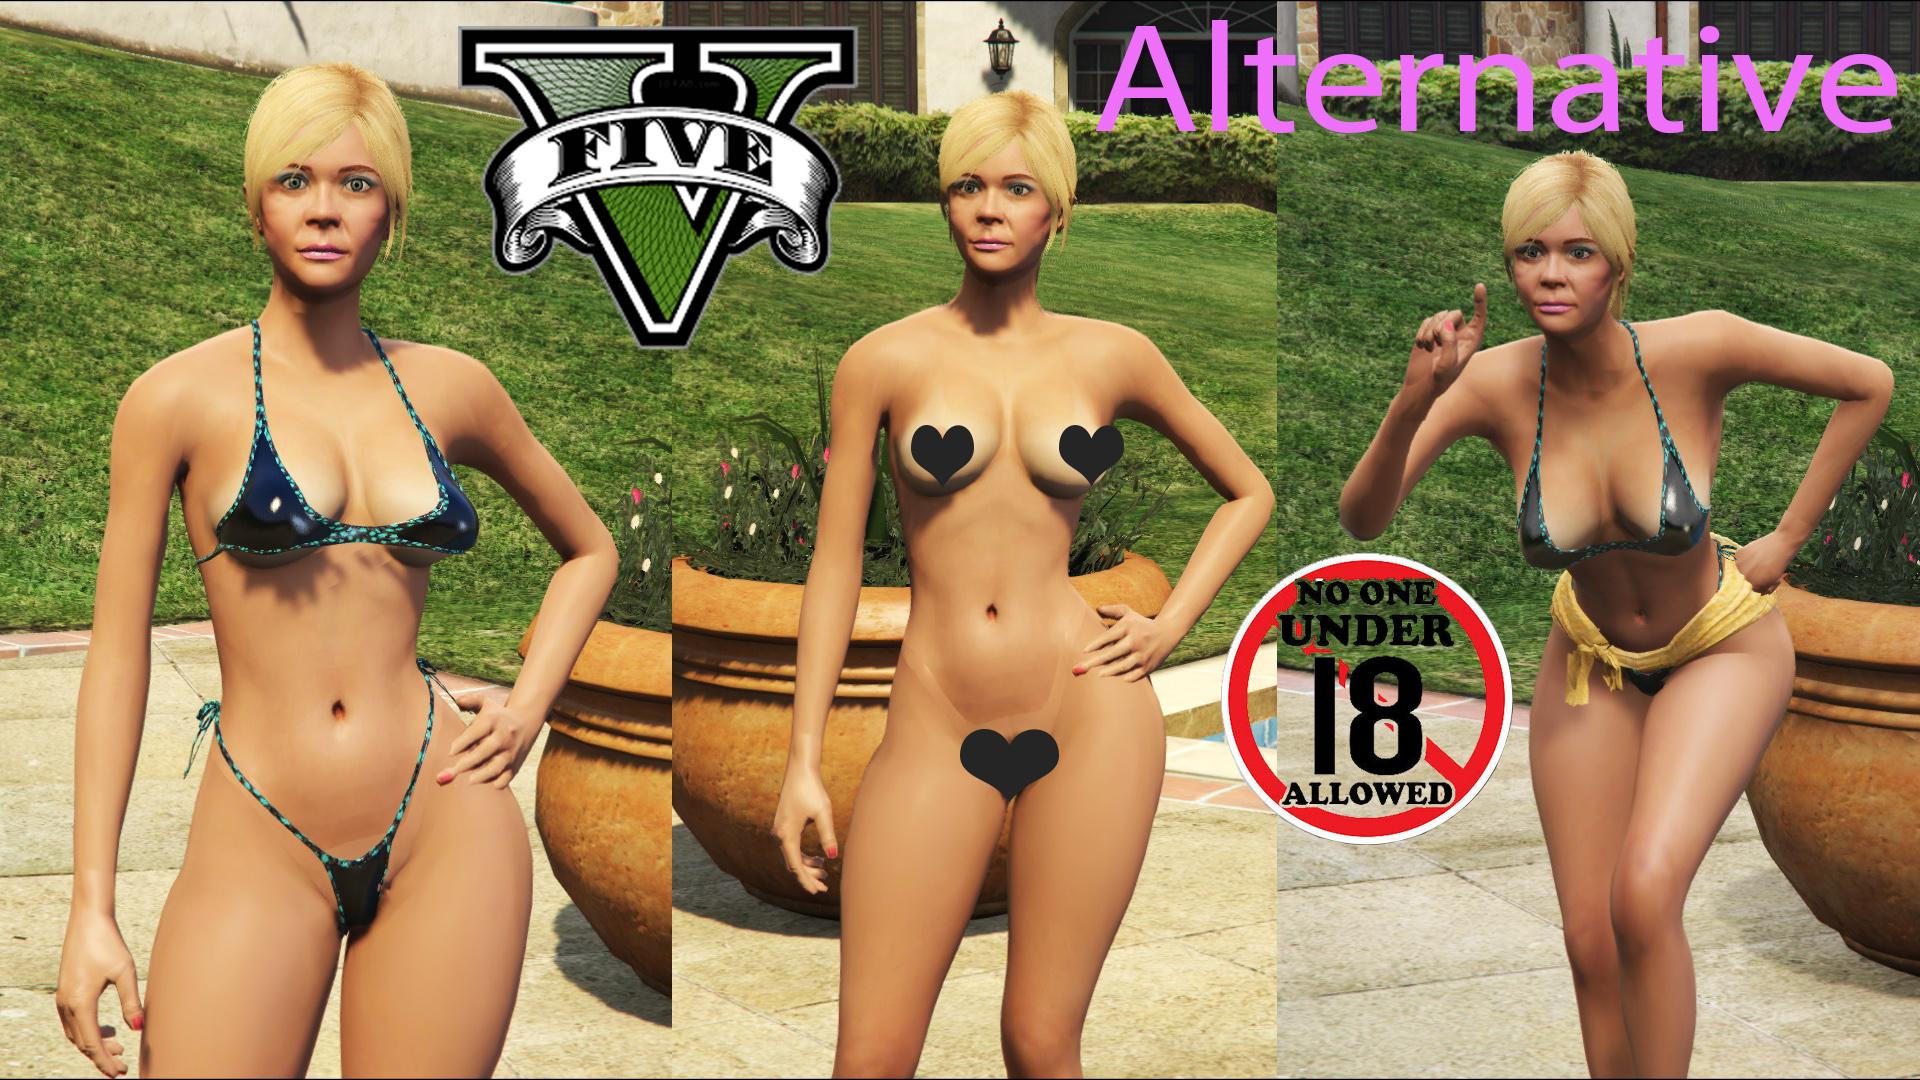 axel gee add tracey gta 5 naked photo